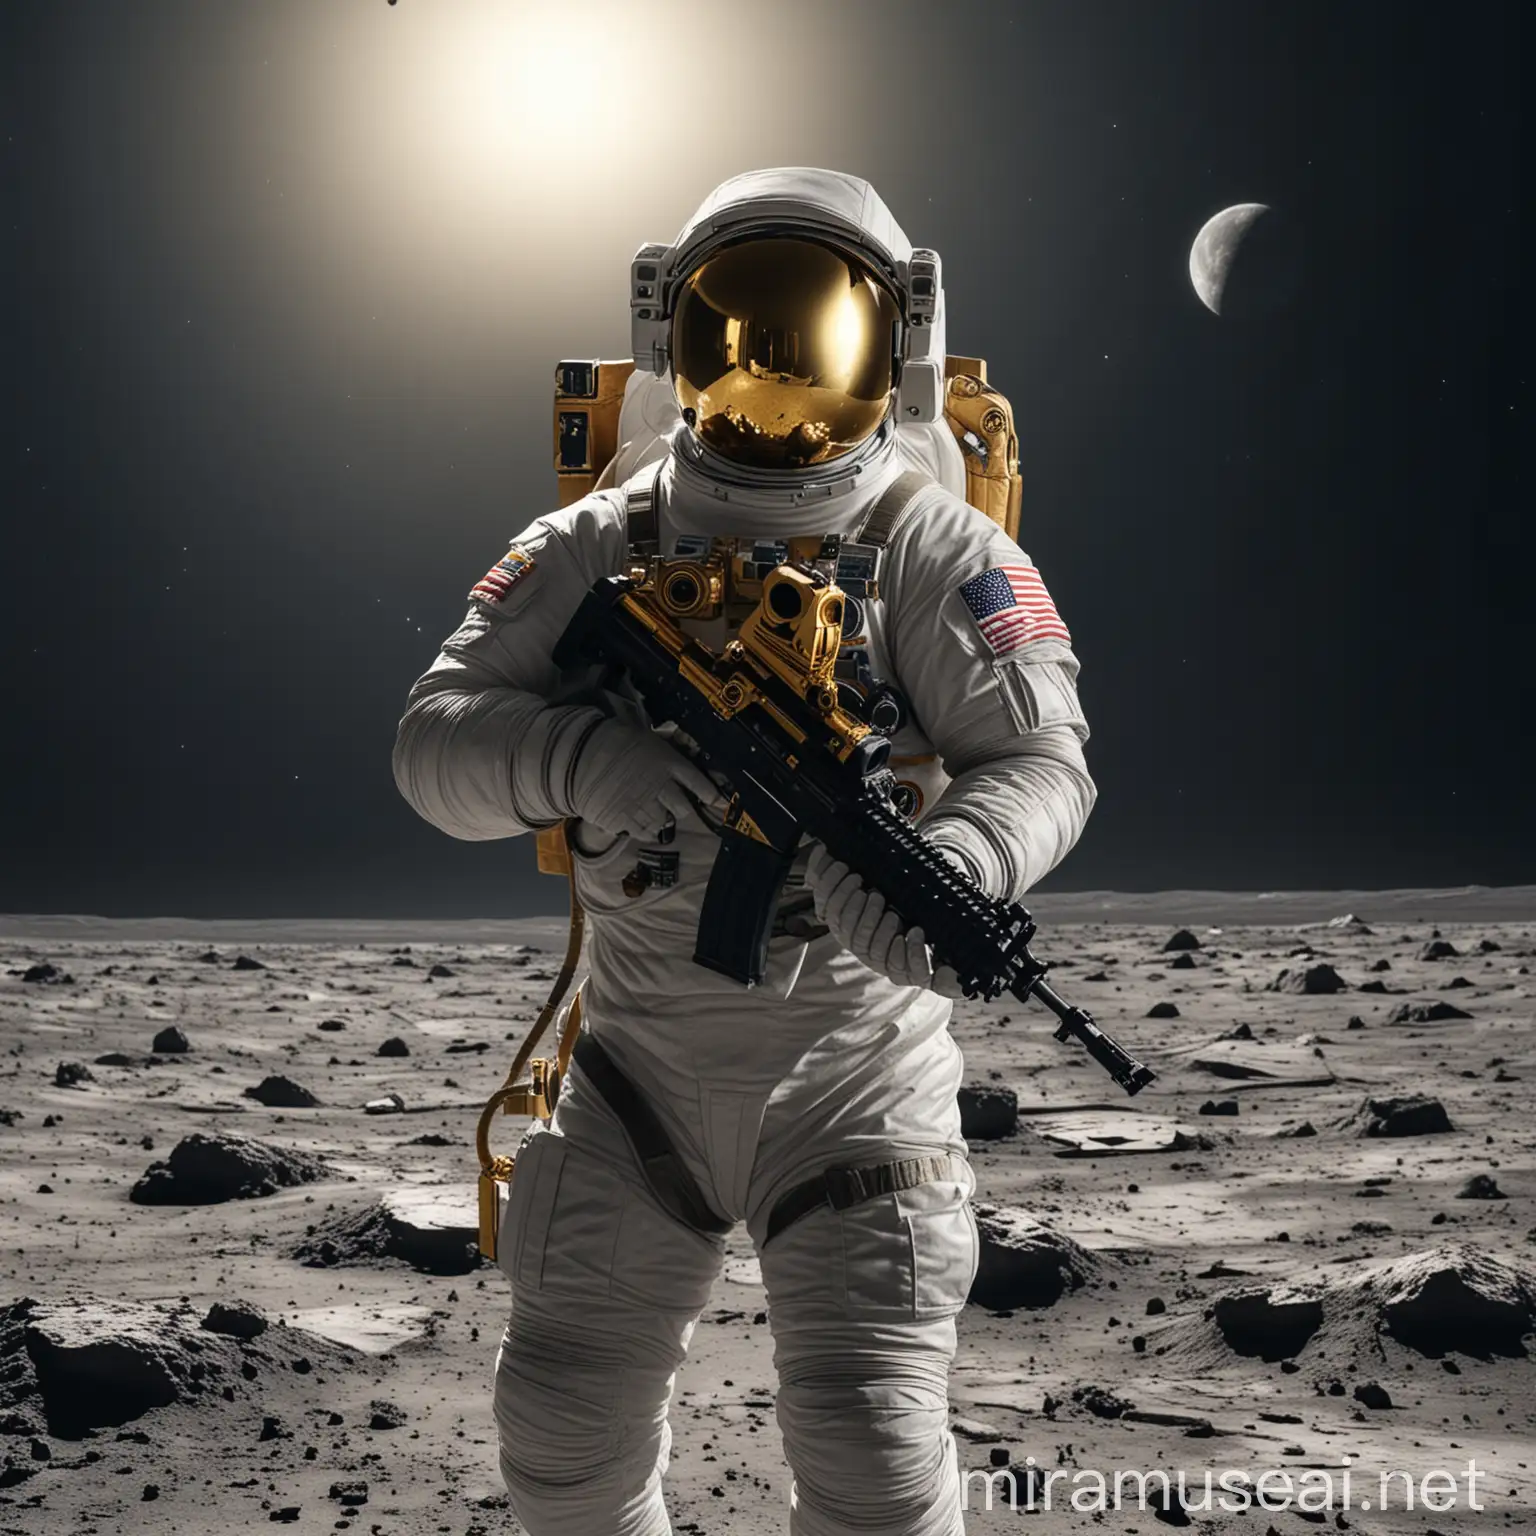 NASA astronaut in a spacesuit with a golden mirror visor, holding an assault rifle, looking at the camera, standing on smooth Moon surface, black outer space, cinematic